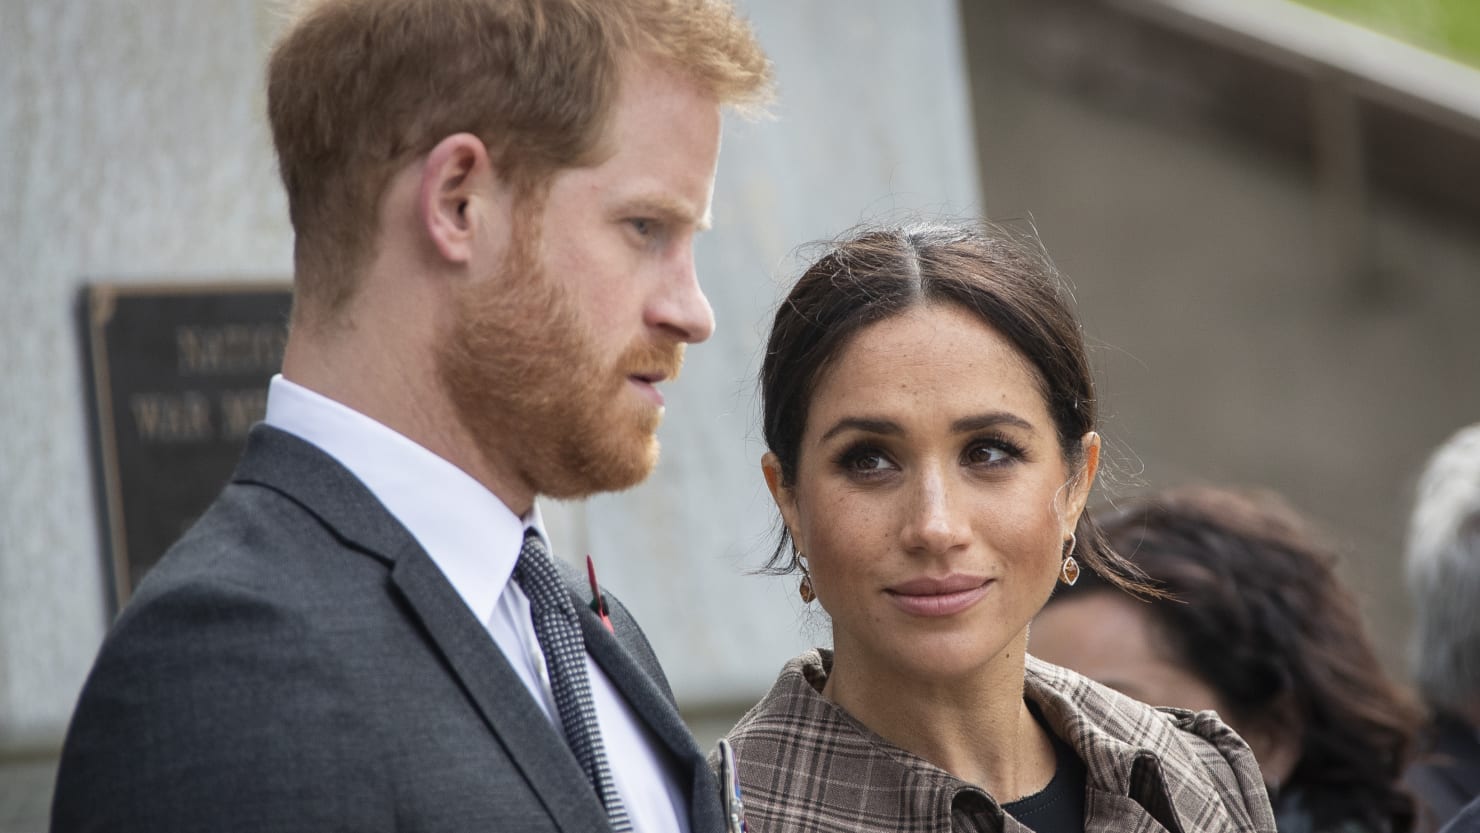 Meghan Markle ‘Screamed’ at Staff, Left Them ‘Broken’ and ‘Shaking’ With Fear, New Book Claims